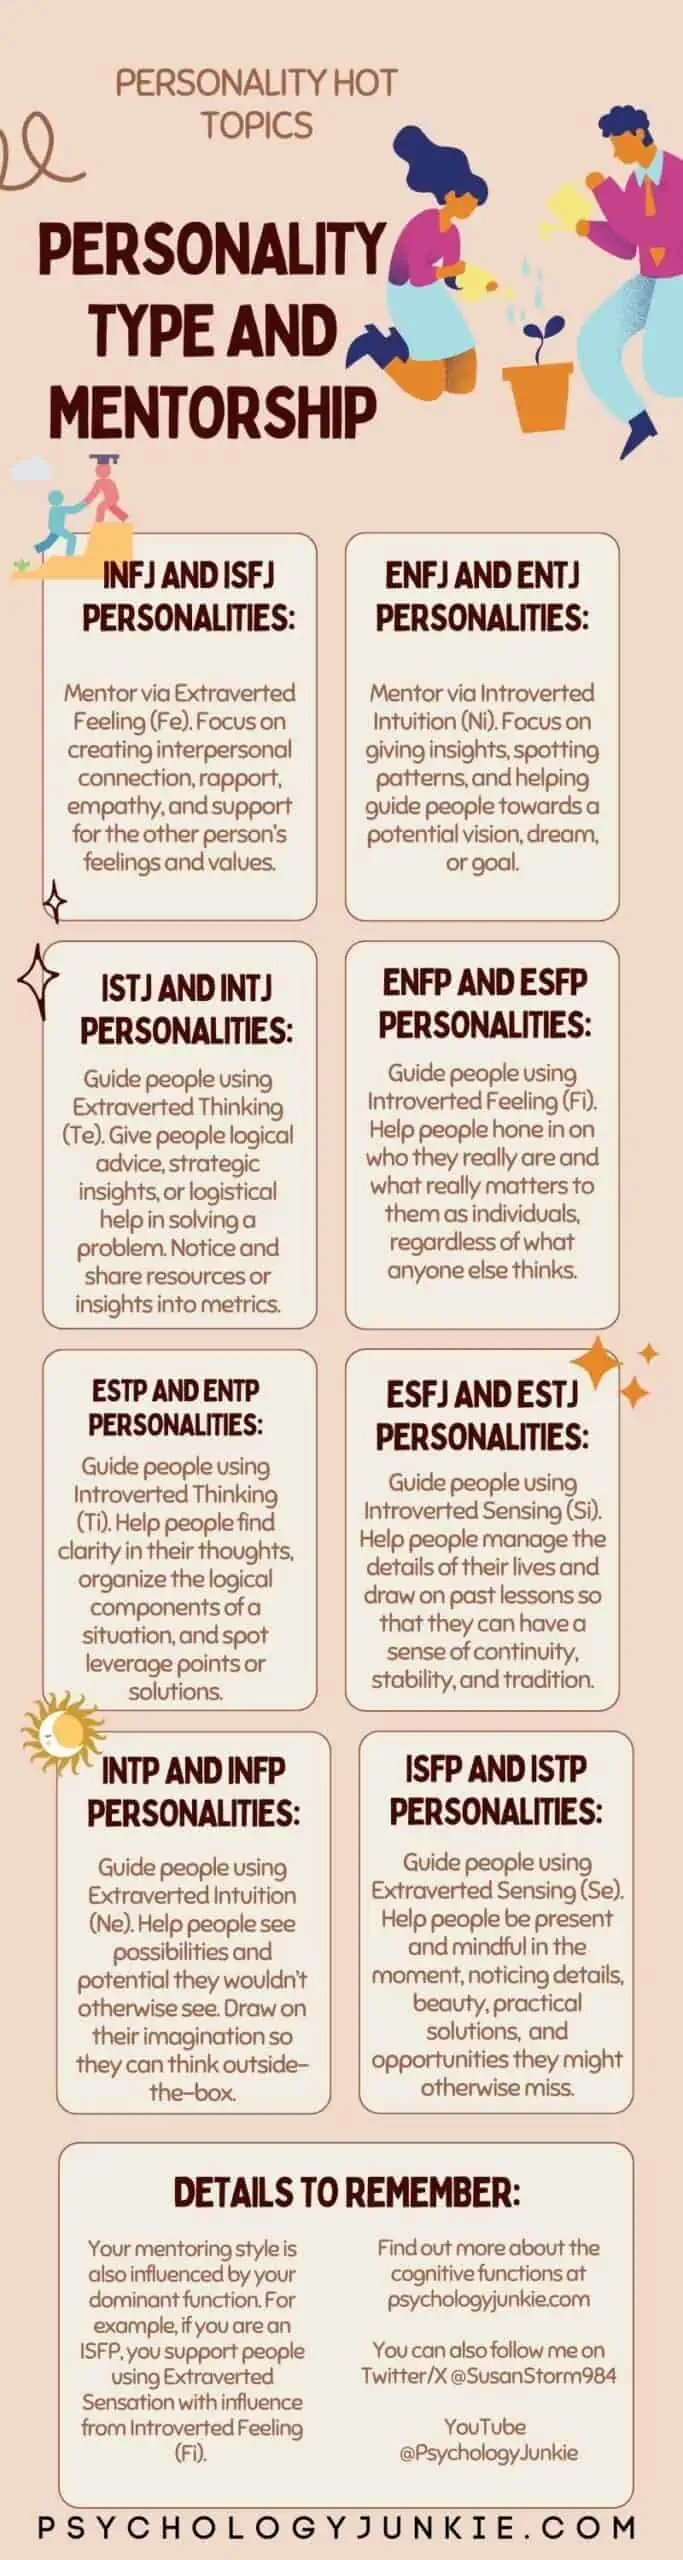 An infographic describing the different ways the 16 Myers-Briggs personality types mentor others. #MBTI #Personality #INFP